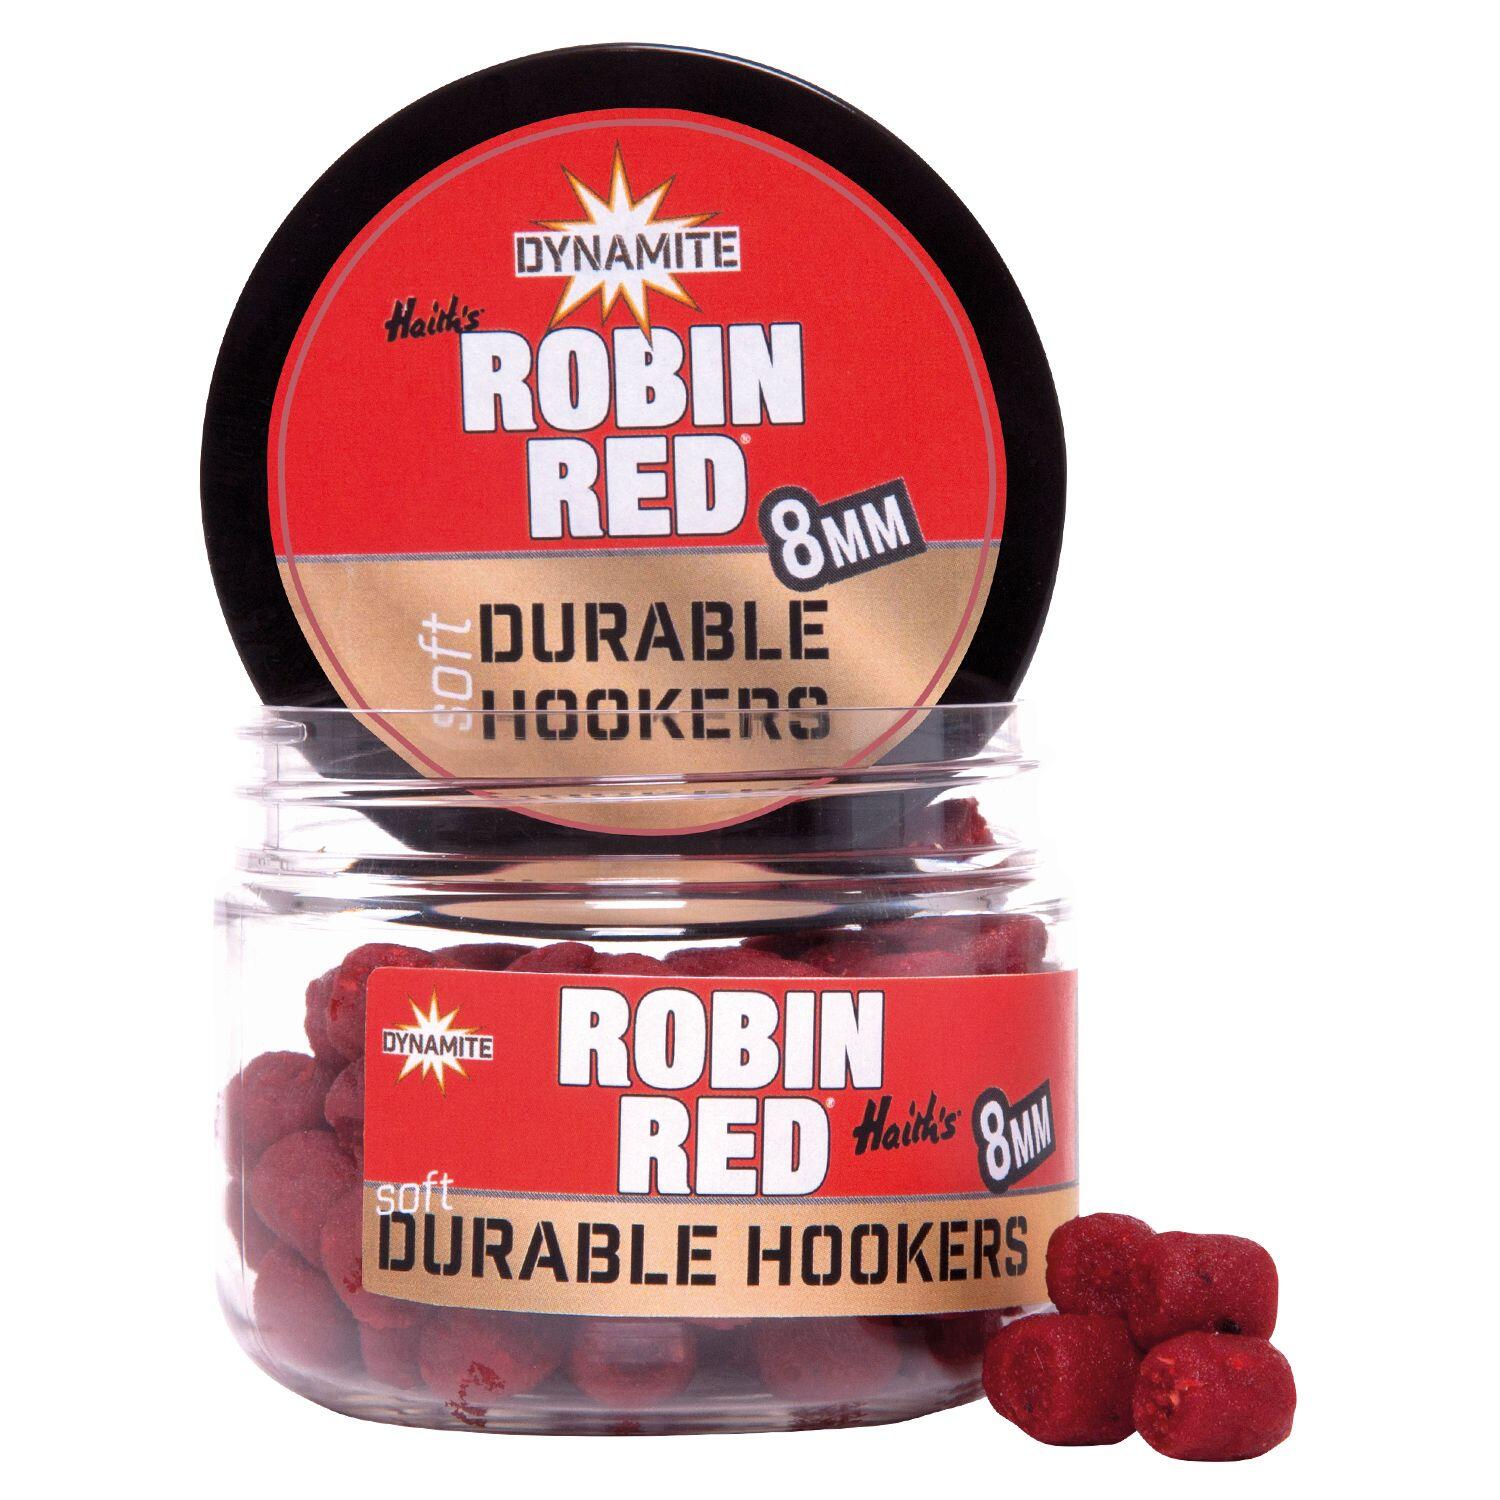 dynamite_robin_red_durable_hookers_dy1448_6mm_fishermania